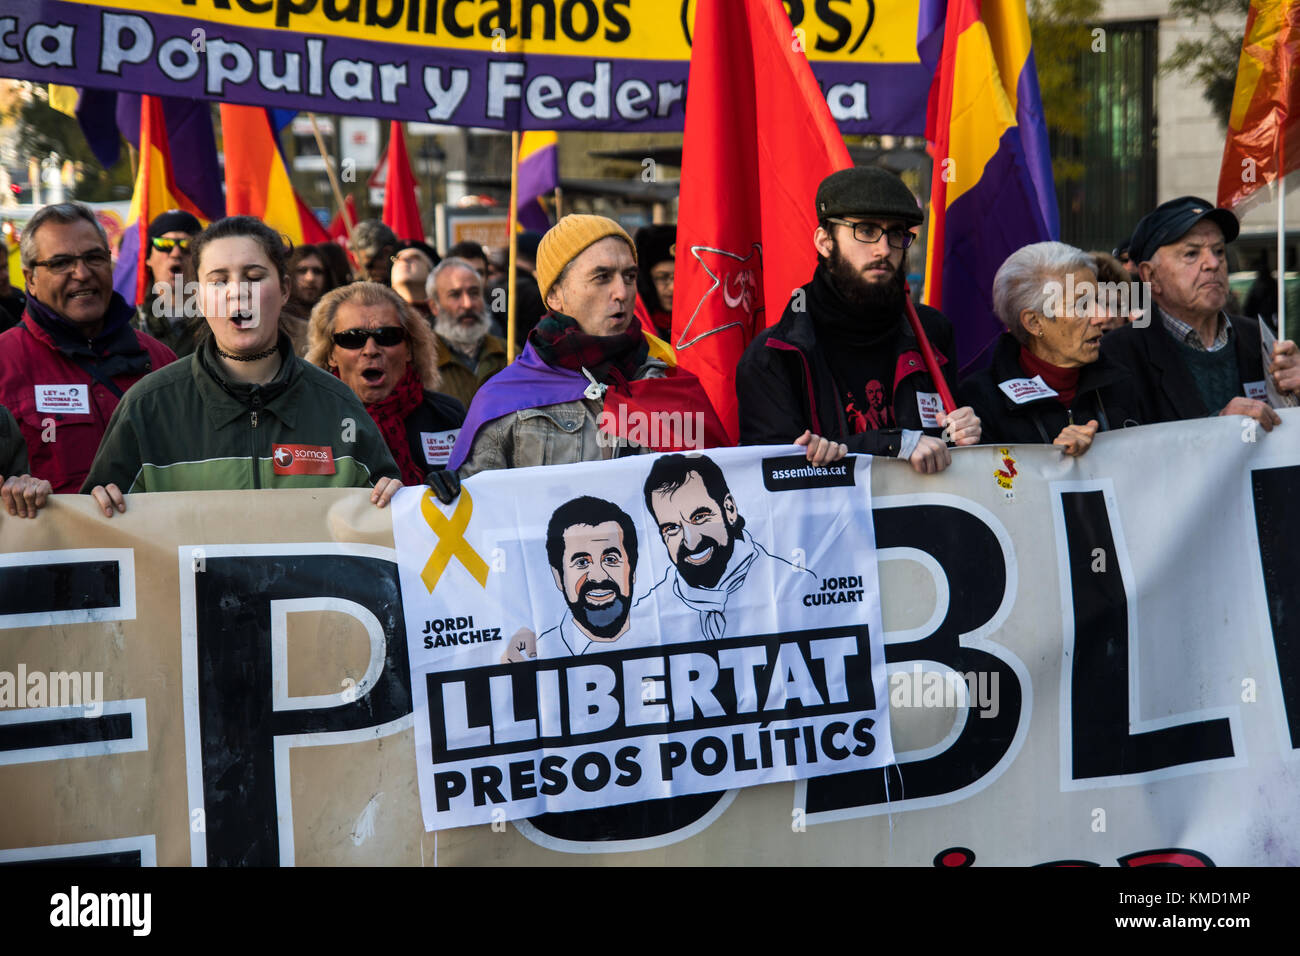 Madrid, Spain. 6th Dec, 2017. A banner demanding freedom for imprisoned Catalan leaders (known as 'Los Jordis') during a demonstration against Monarchy, demonstrators are demanding a 3rd Republic the day of the 39th anniversary of the Spanish Constitution in Madrid, Spain. Credit: Marcos del Mazo/Alamy Live News Stock Photo